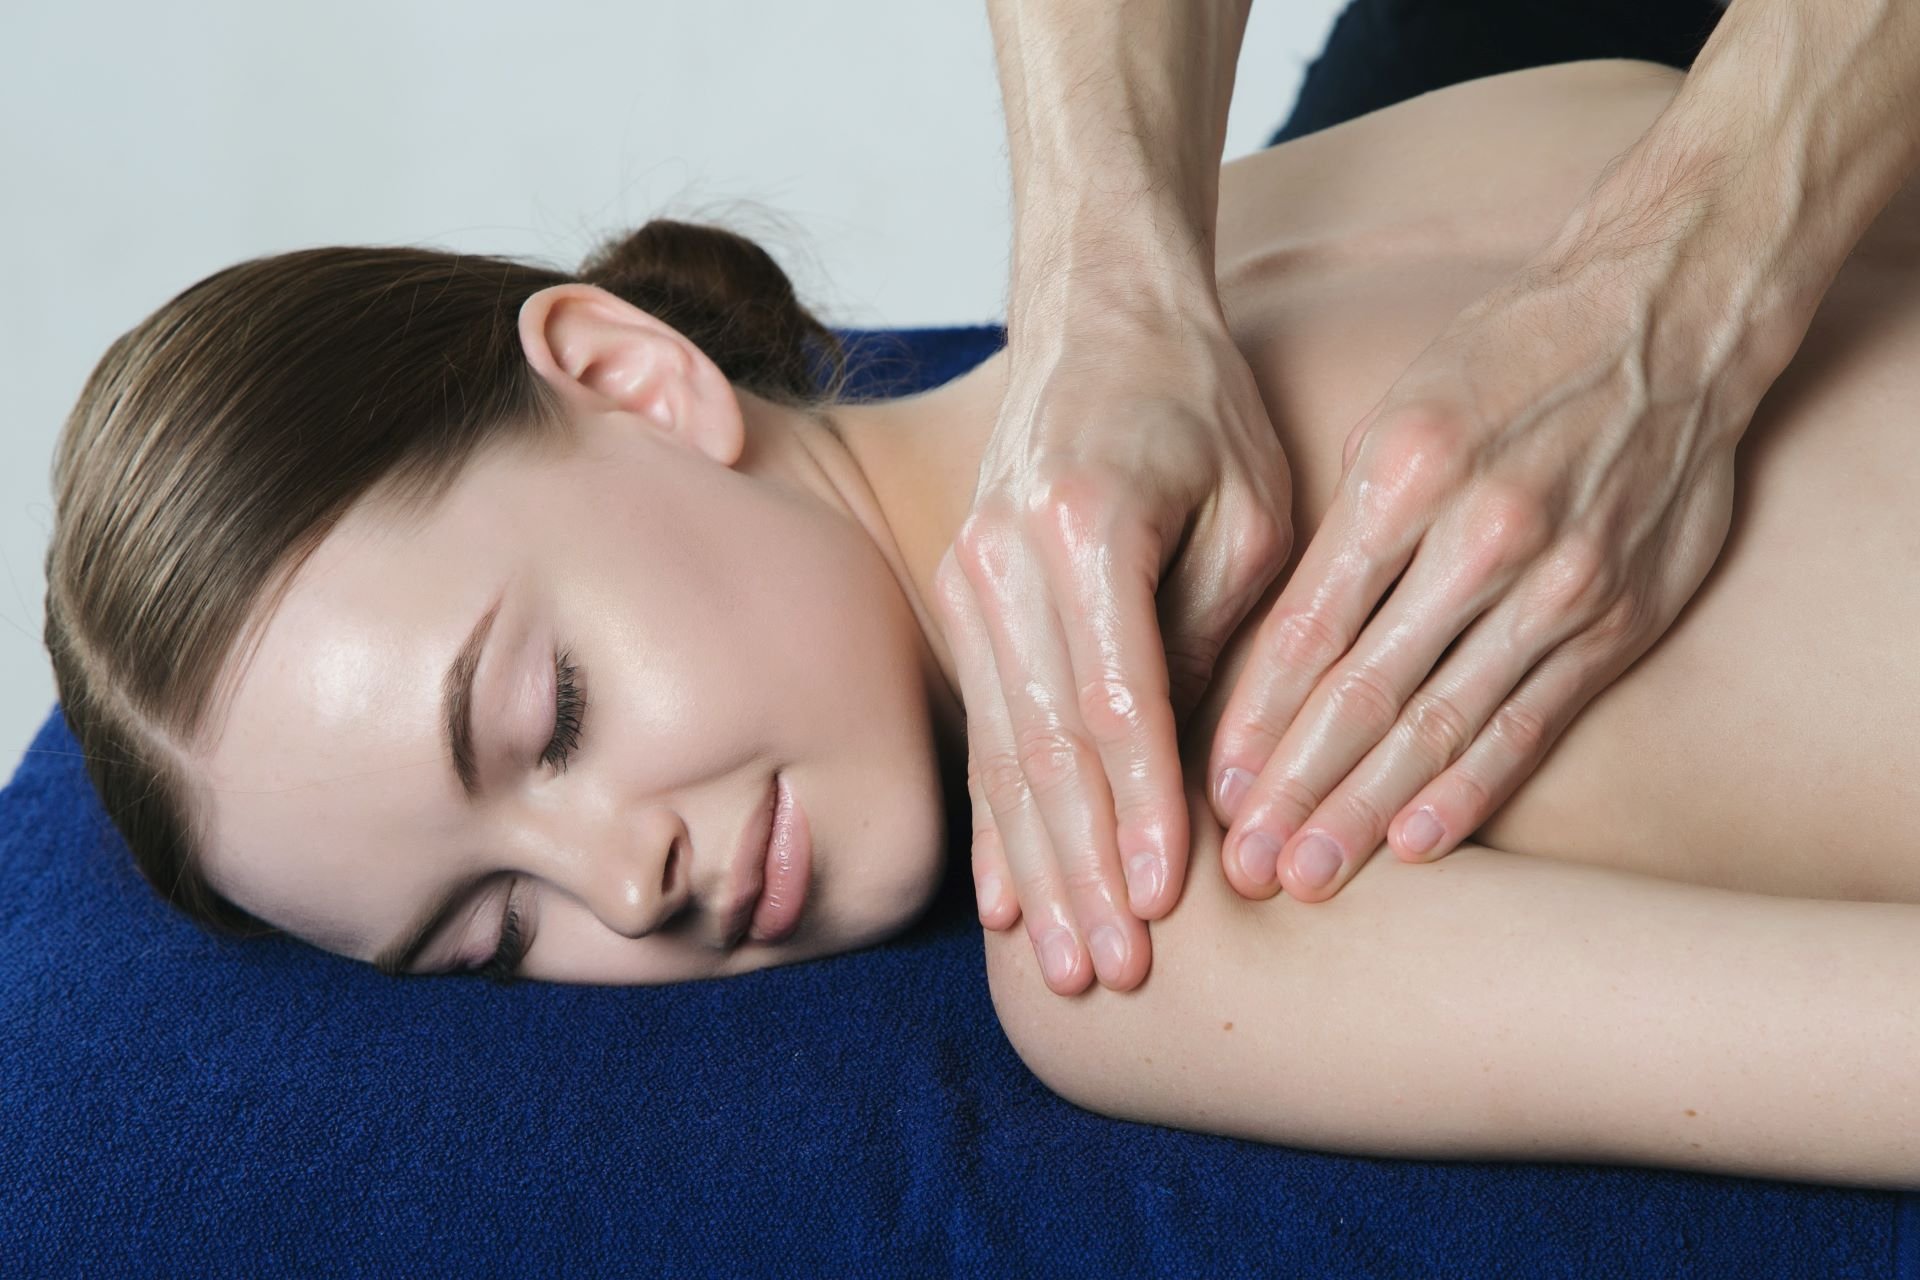 Increase Emotional Well-being - The Psychological Impact of Business Trip Massage